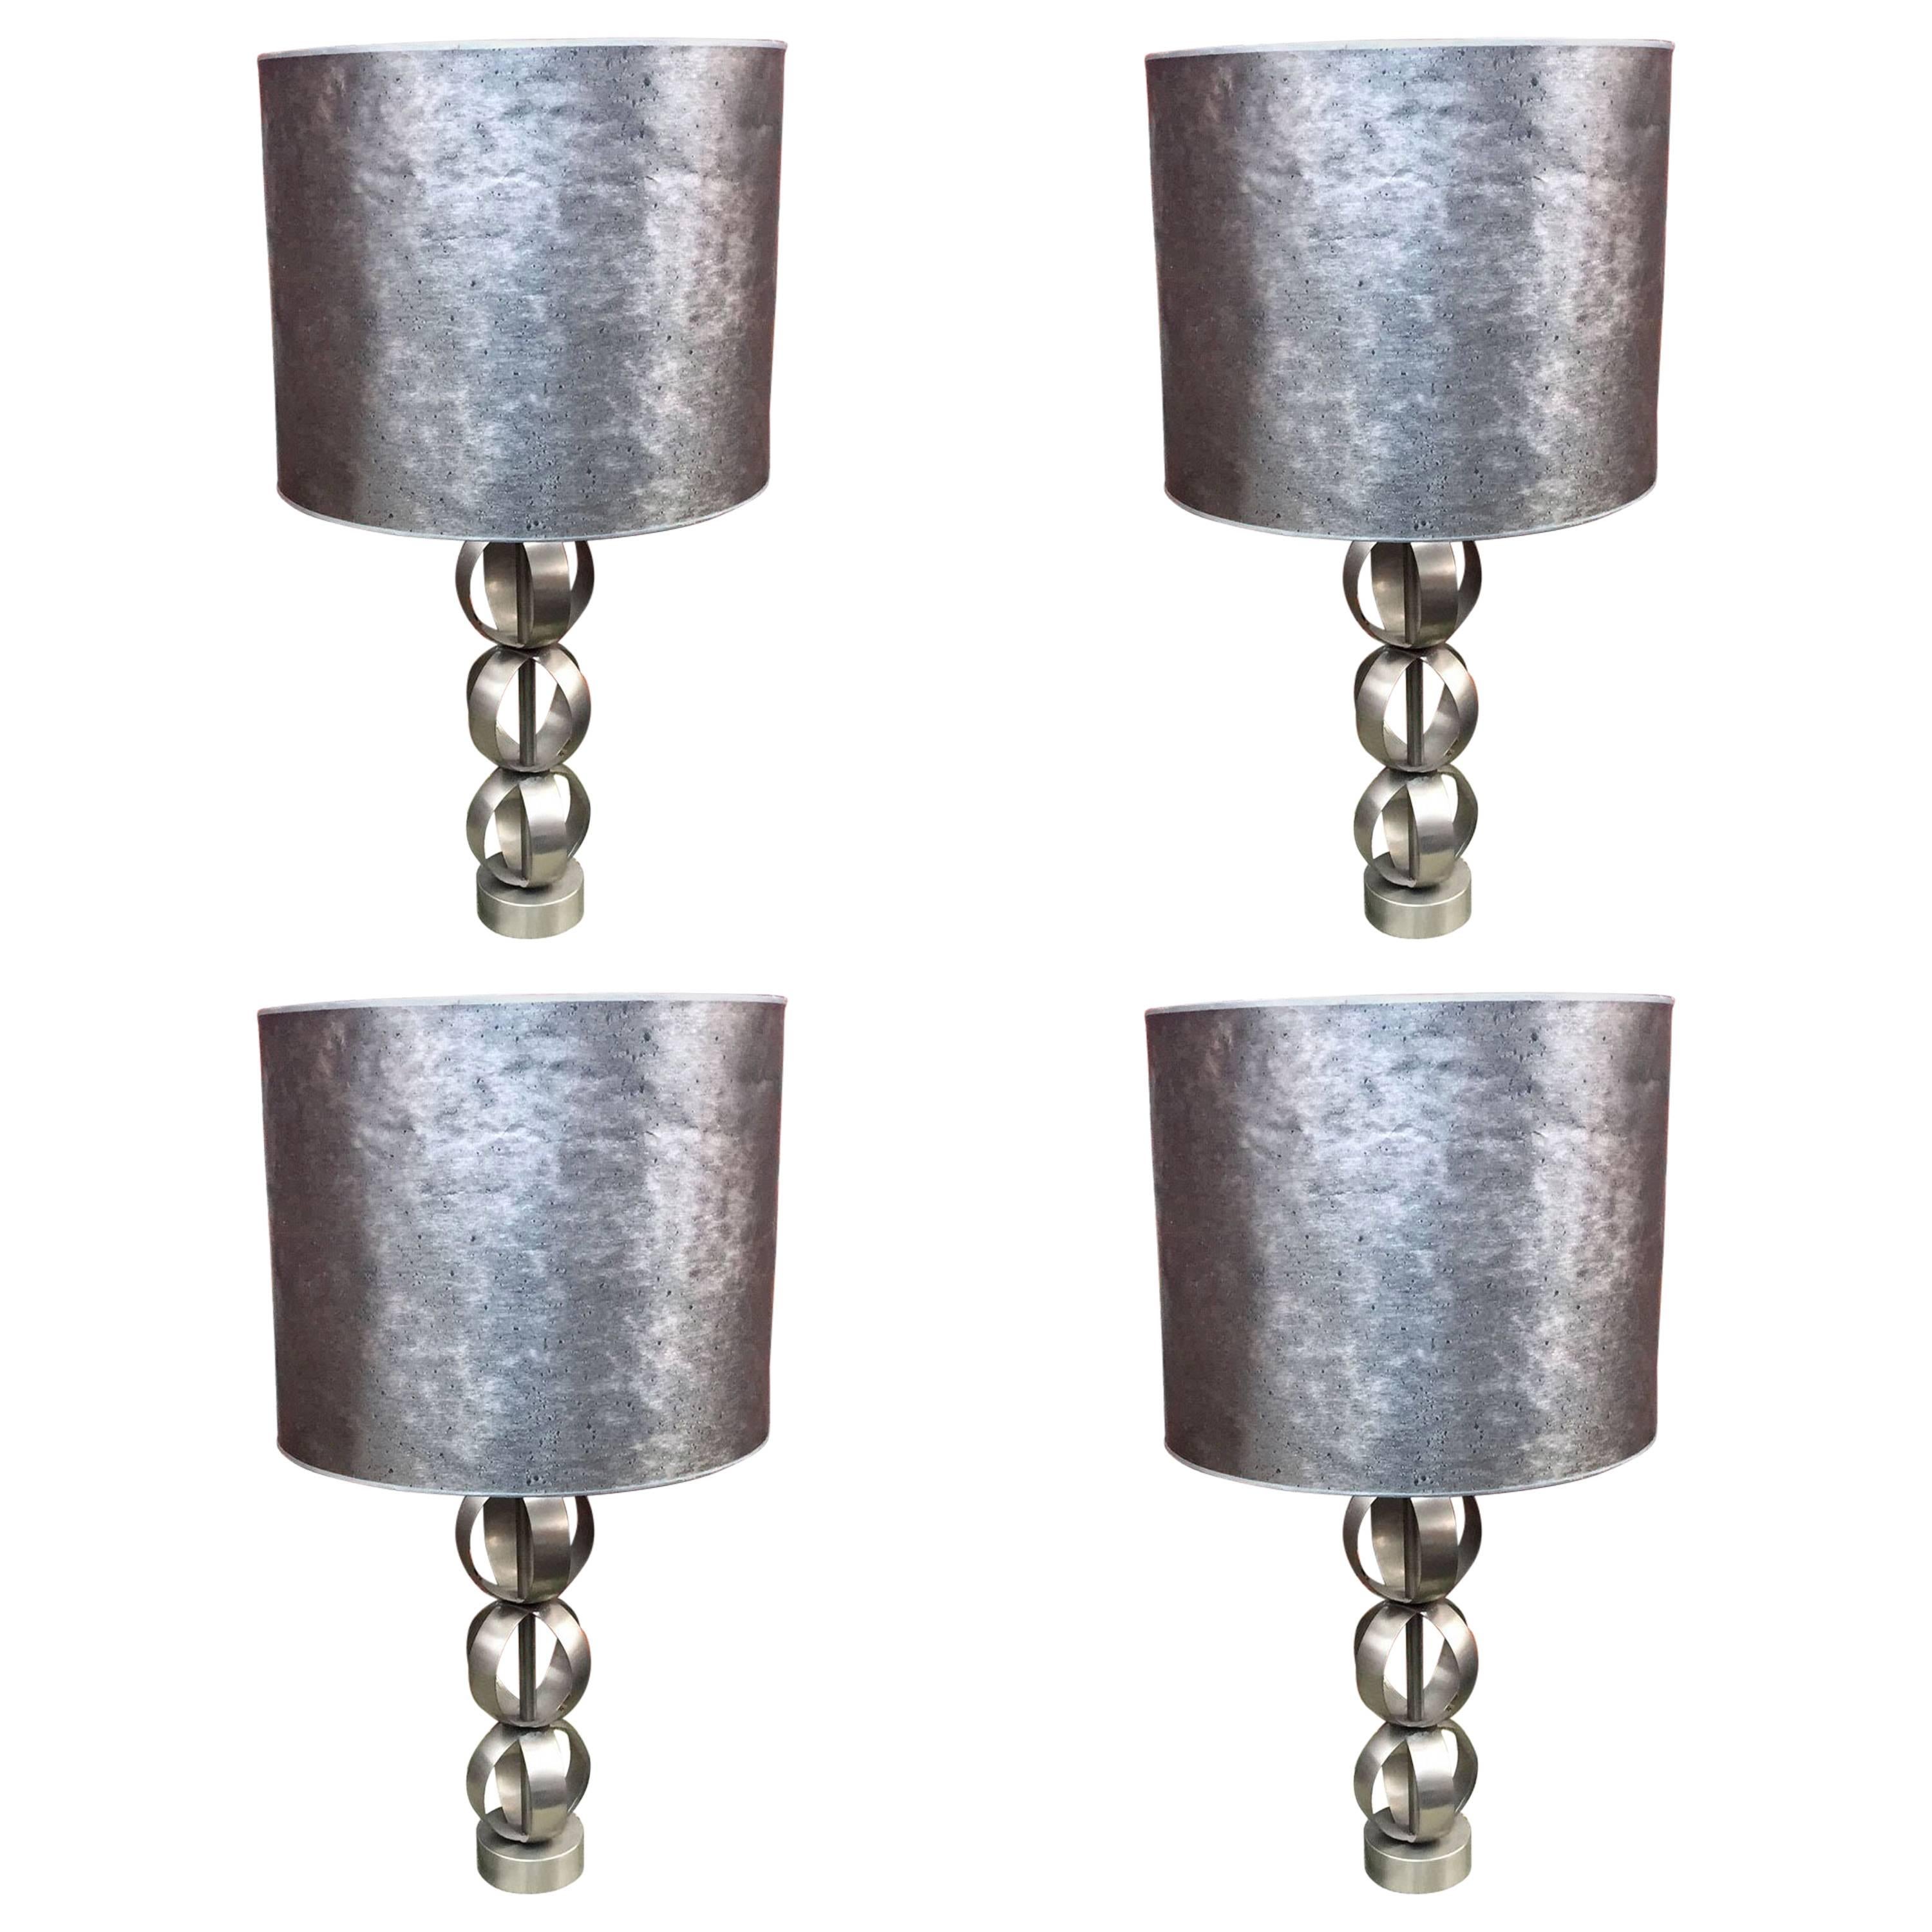 Set of Four Steel Table Lamps, circa 1970-1980